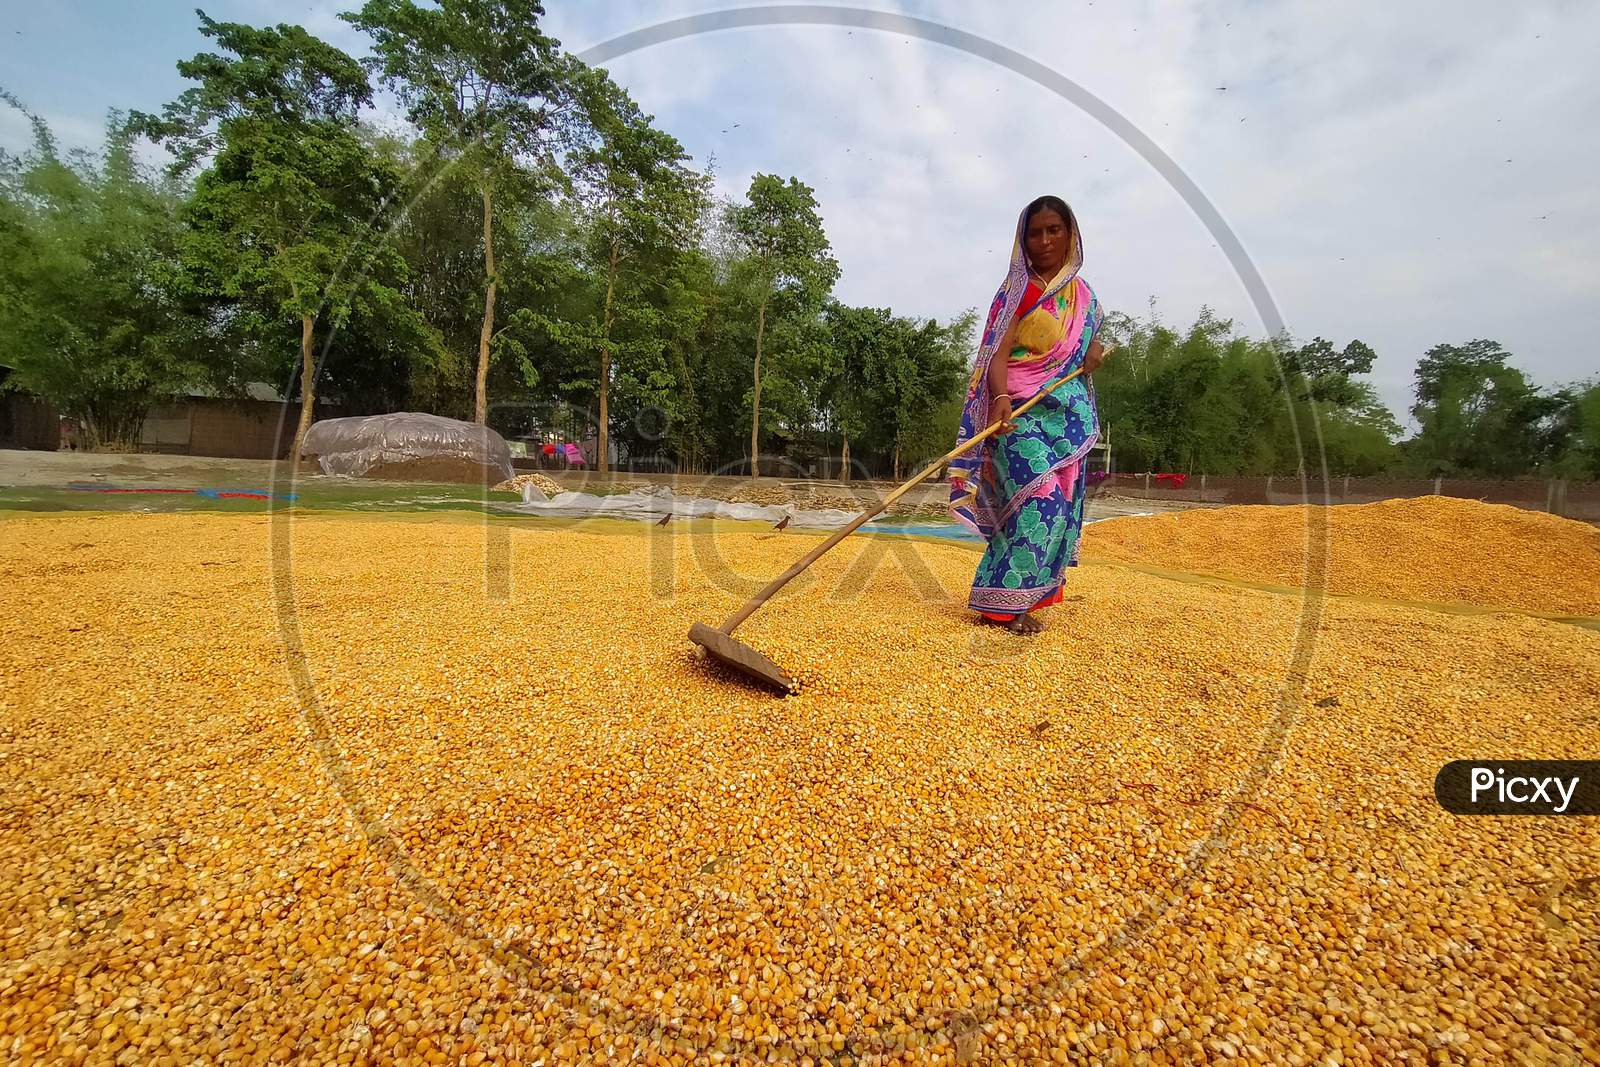 A Women  Spreads Maize Husks To Dry In A Field At Hajo In Kamrup District Of Assam On April 25,2020